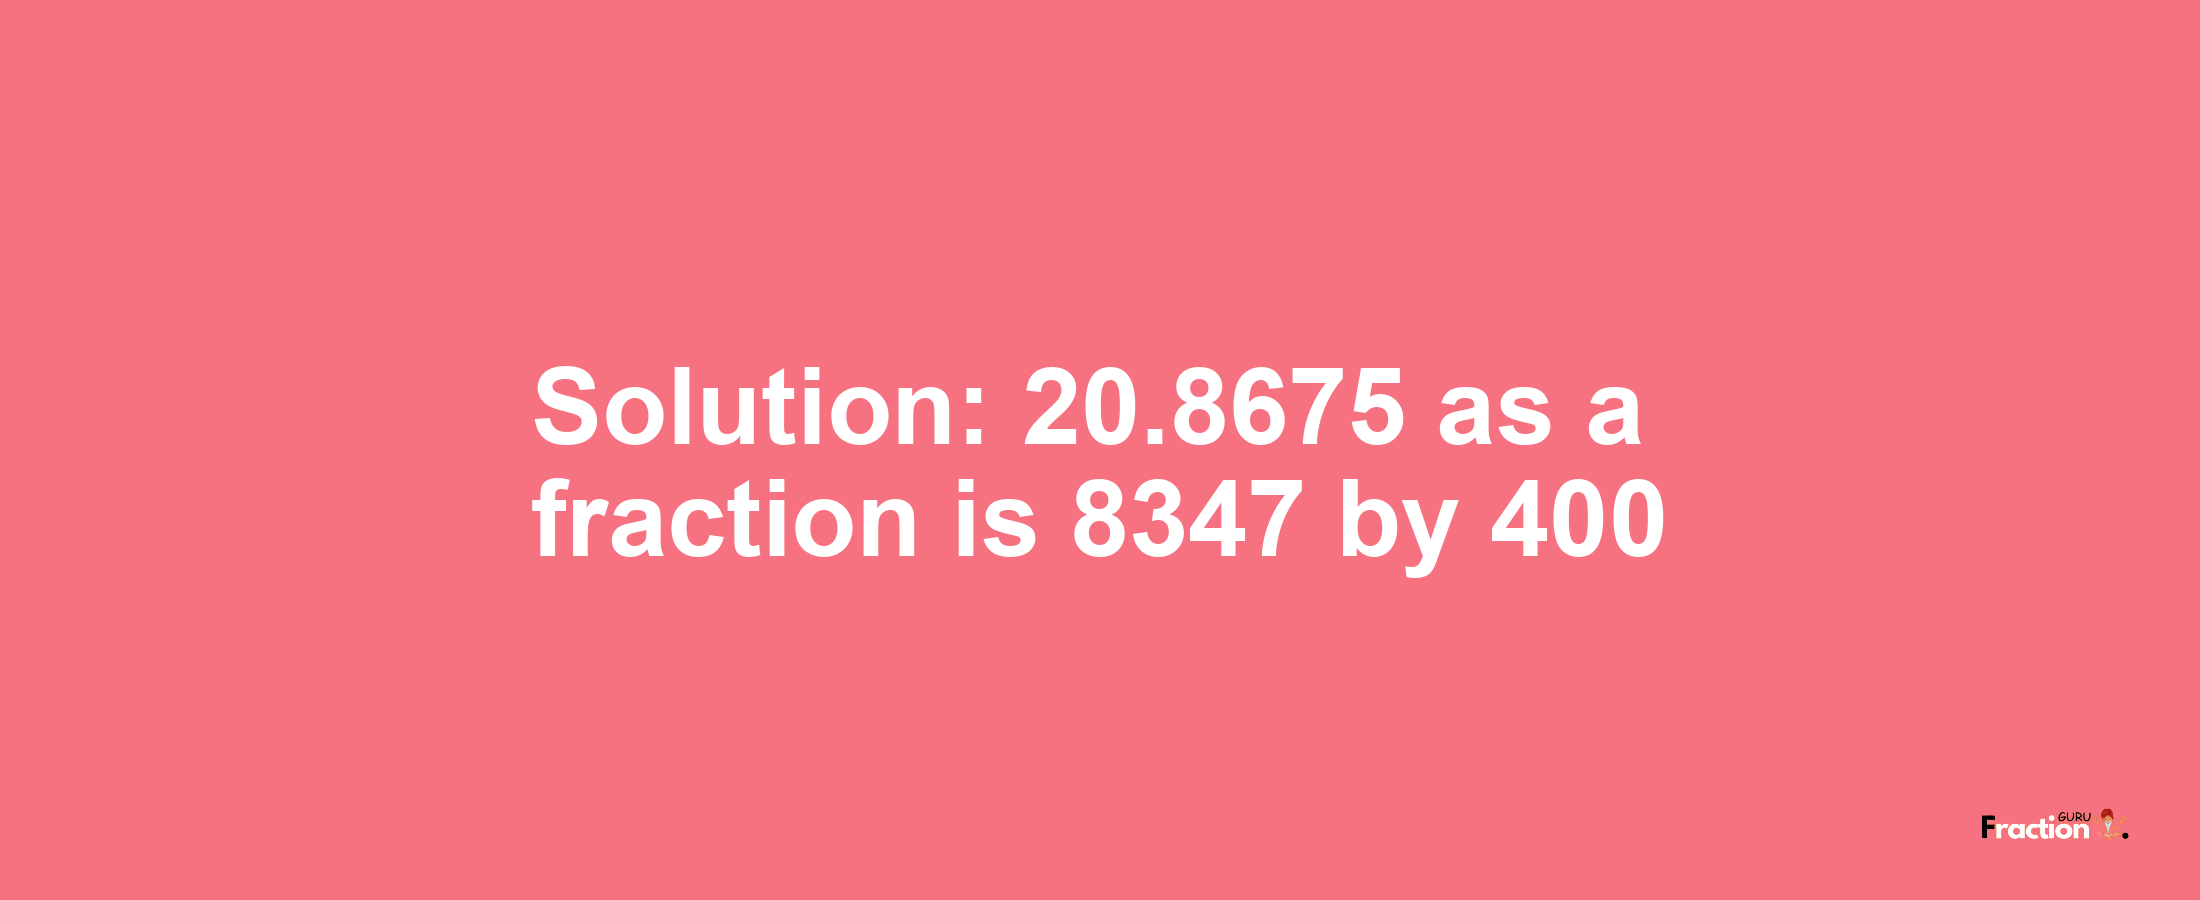 Solution:20.8675 as a fraction is 8347/400